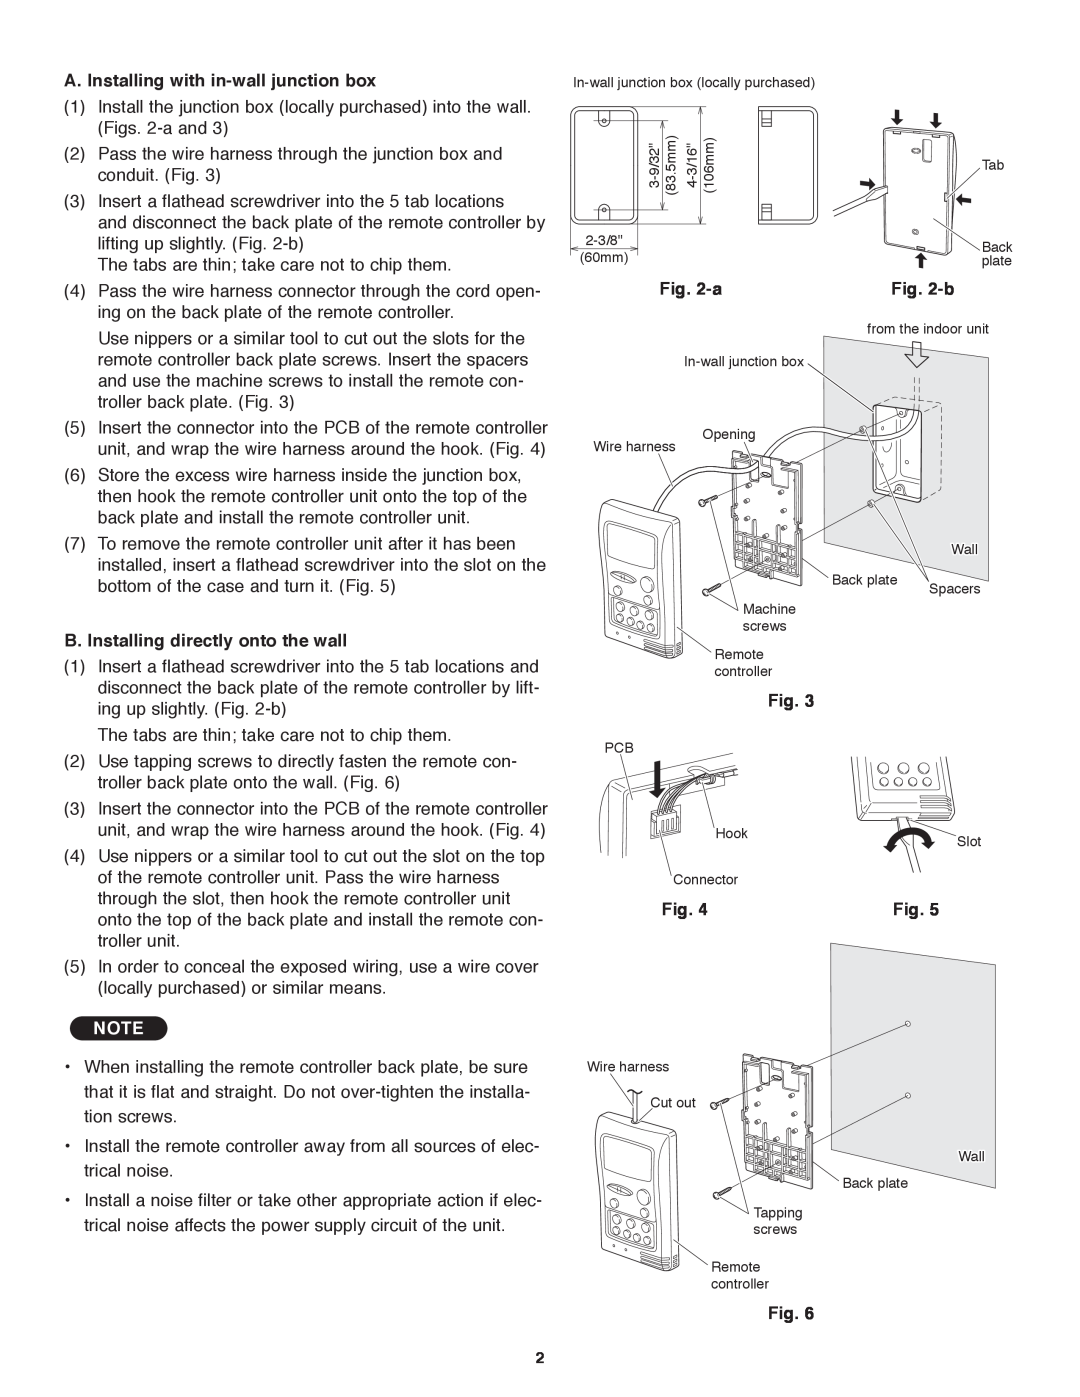 Panasonic R410A service manual A. Installing with in-walljunction box, B. Installing directly onto the wall, Fig 